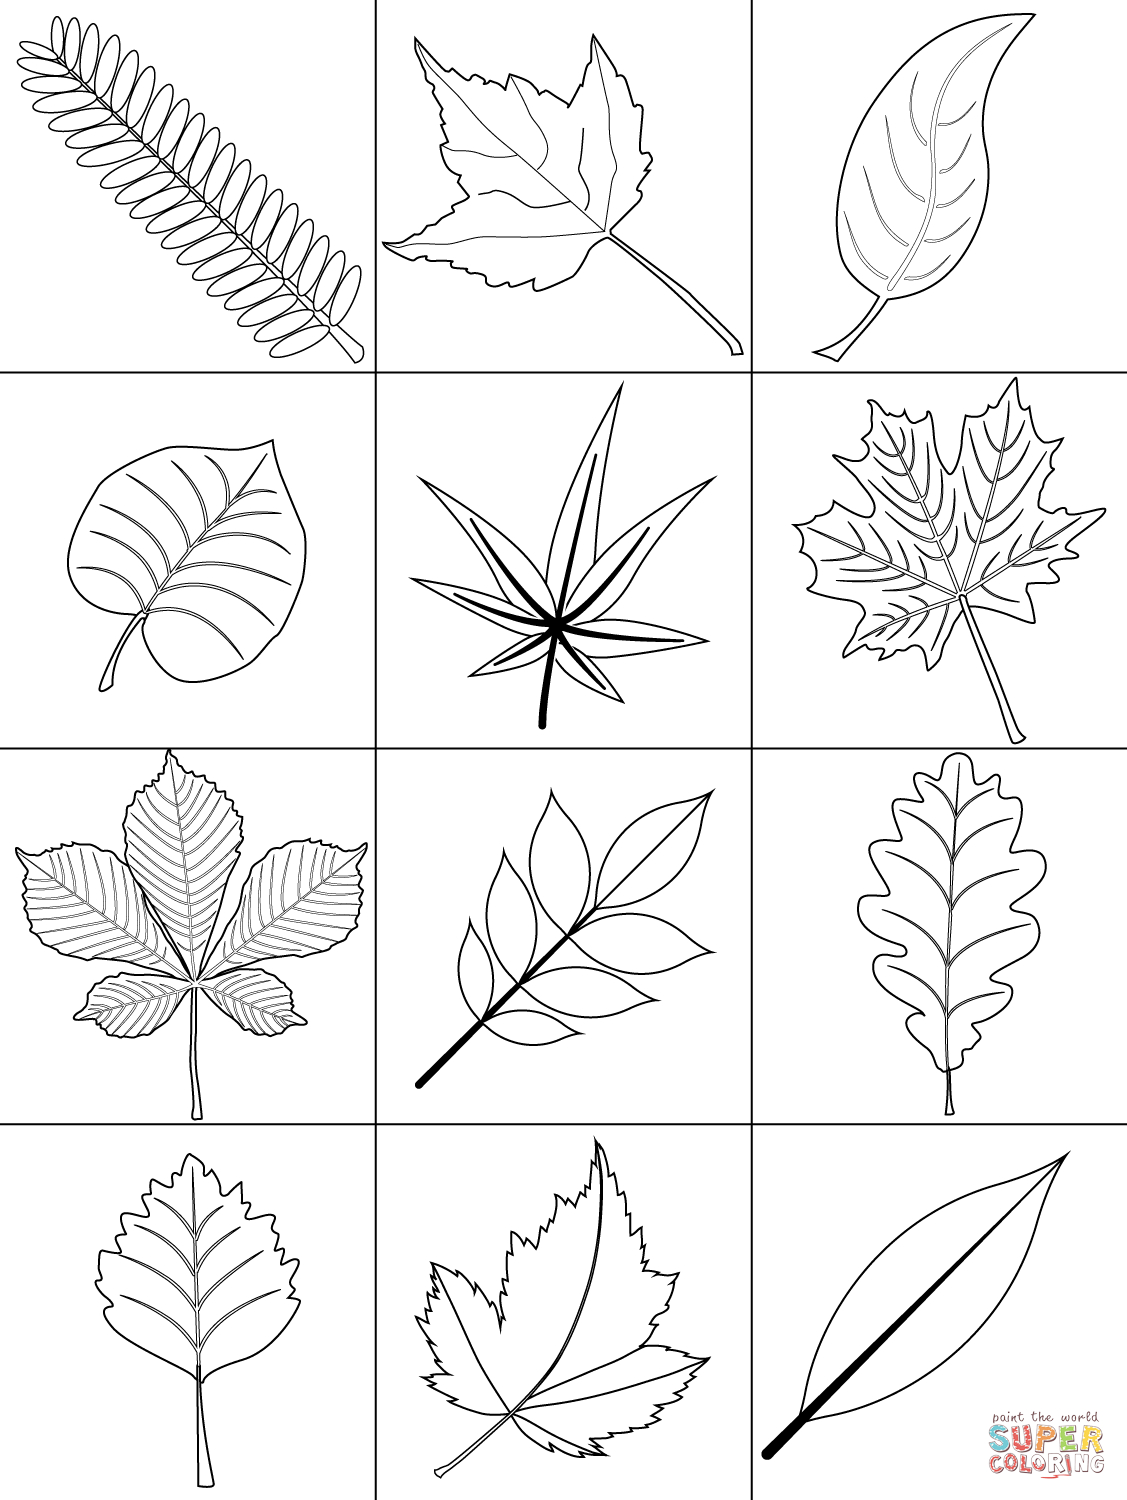 Autumn Leaves Coloring Page | Free Printable Coloring Pages - Free Printable Pictures Of Autumn Leaves